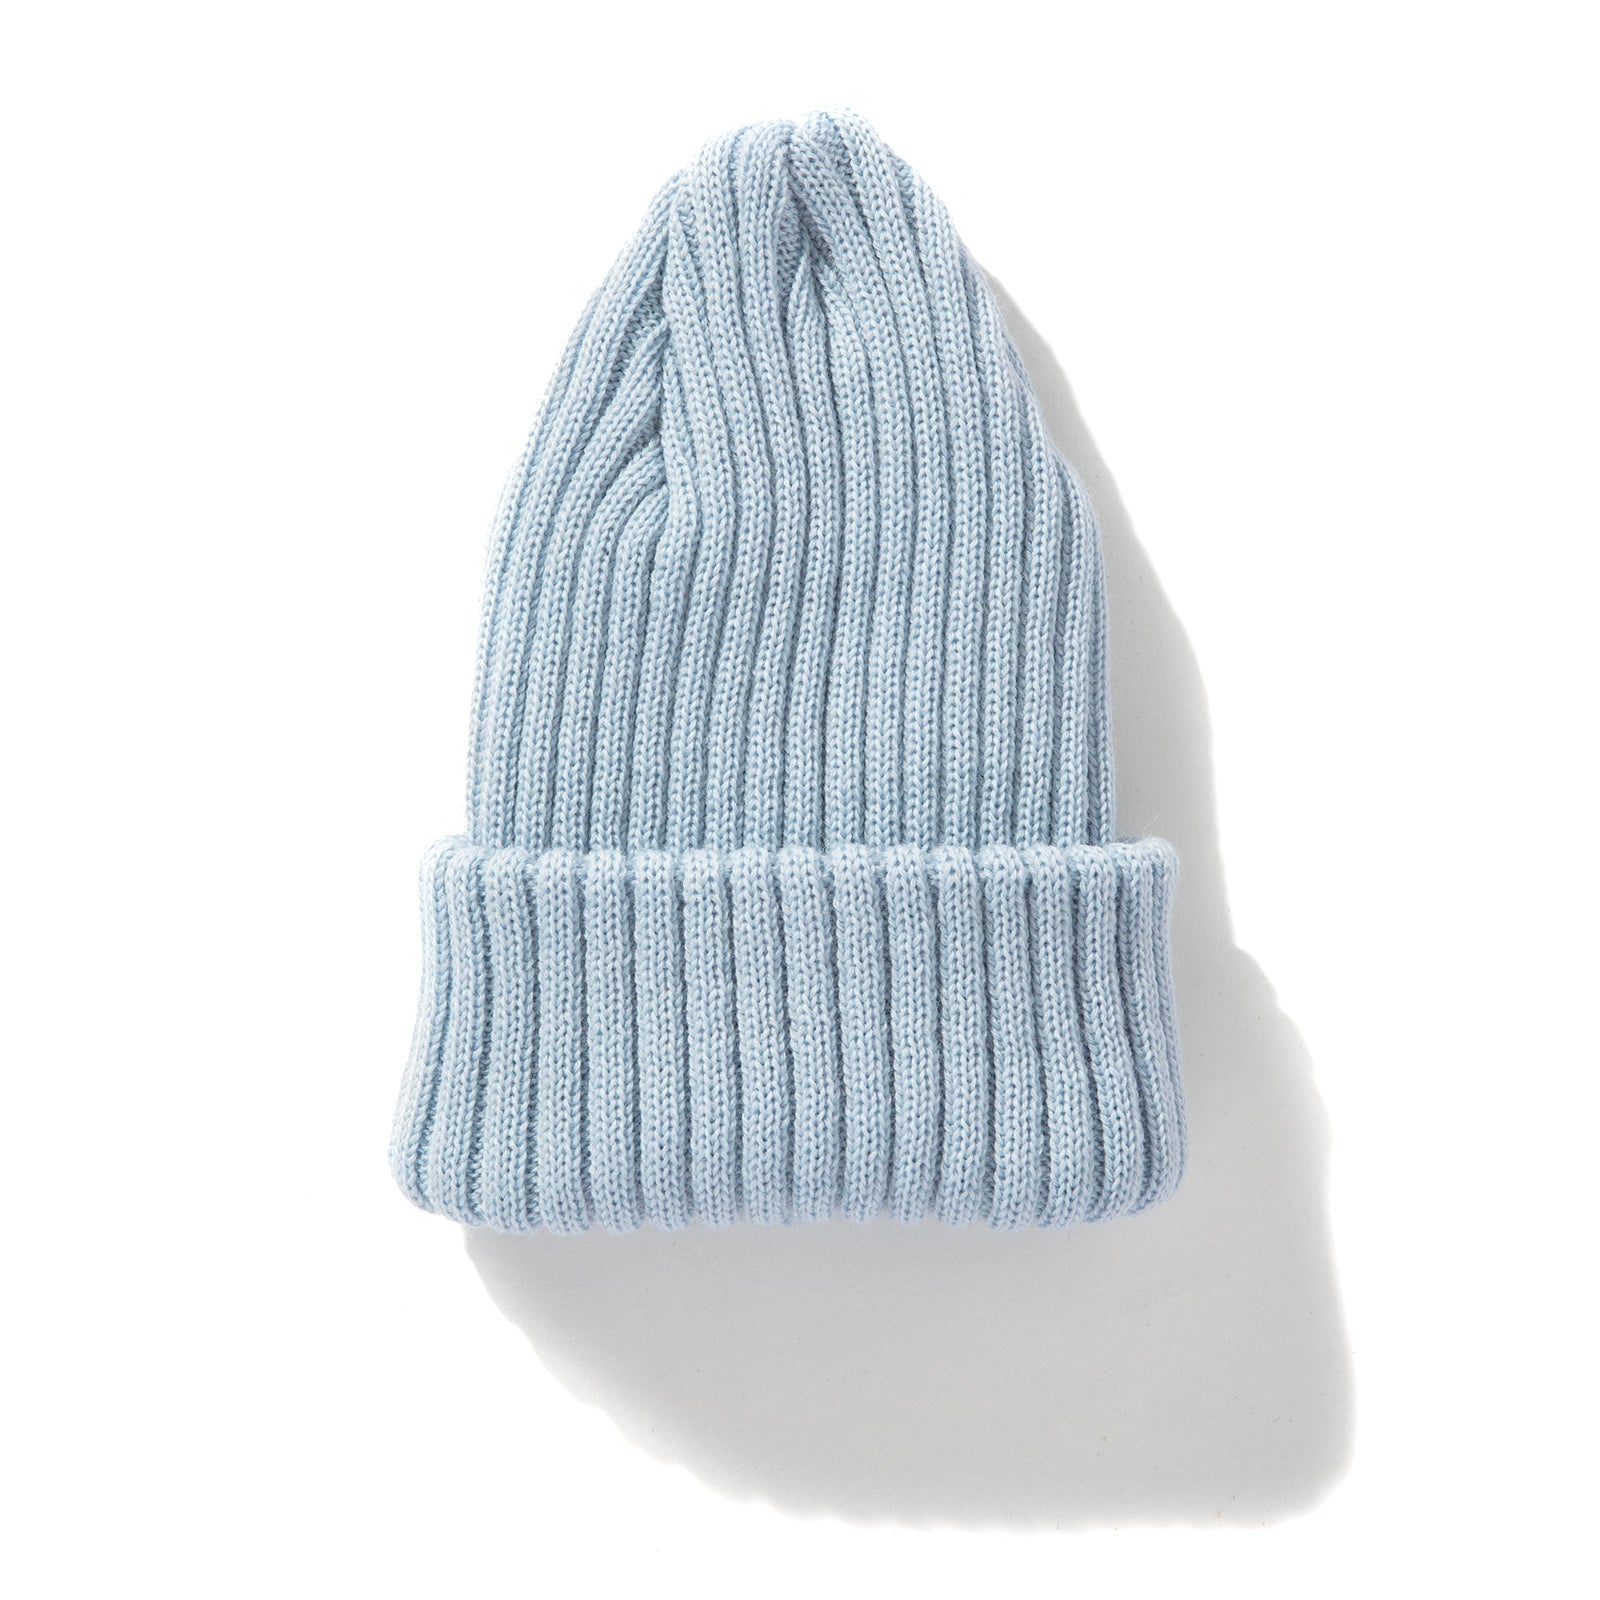 WOOL BRONSON KNIT CAP – The Real McCoy's